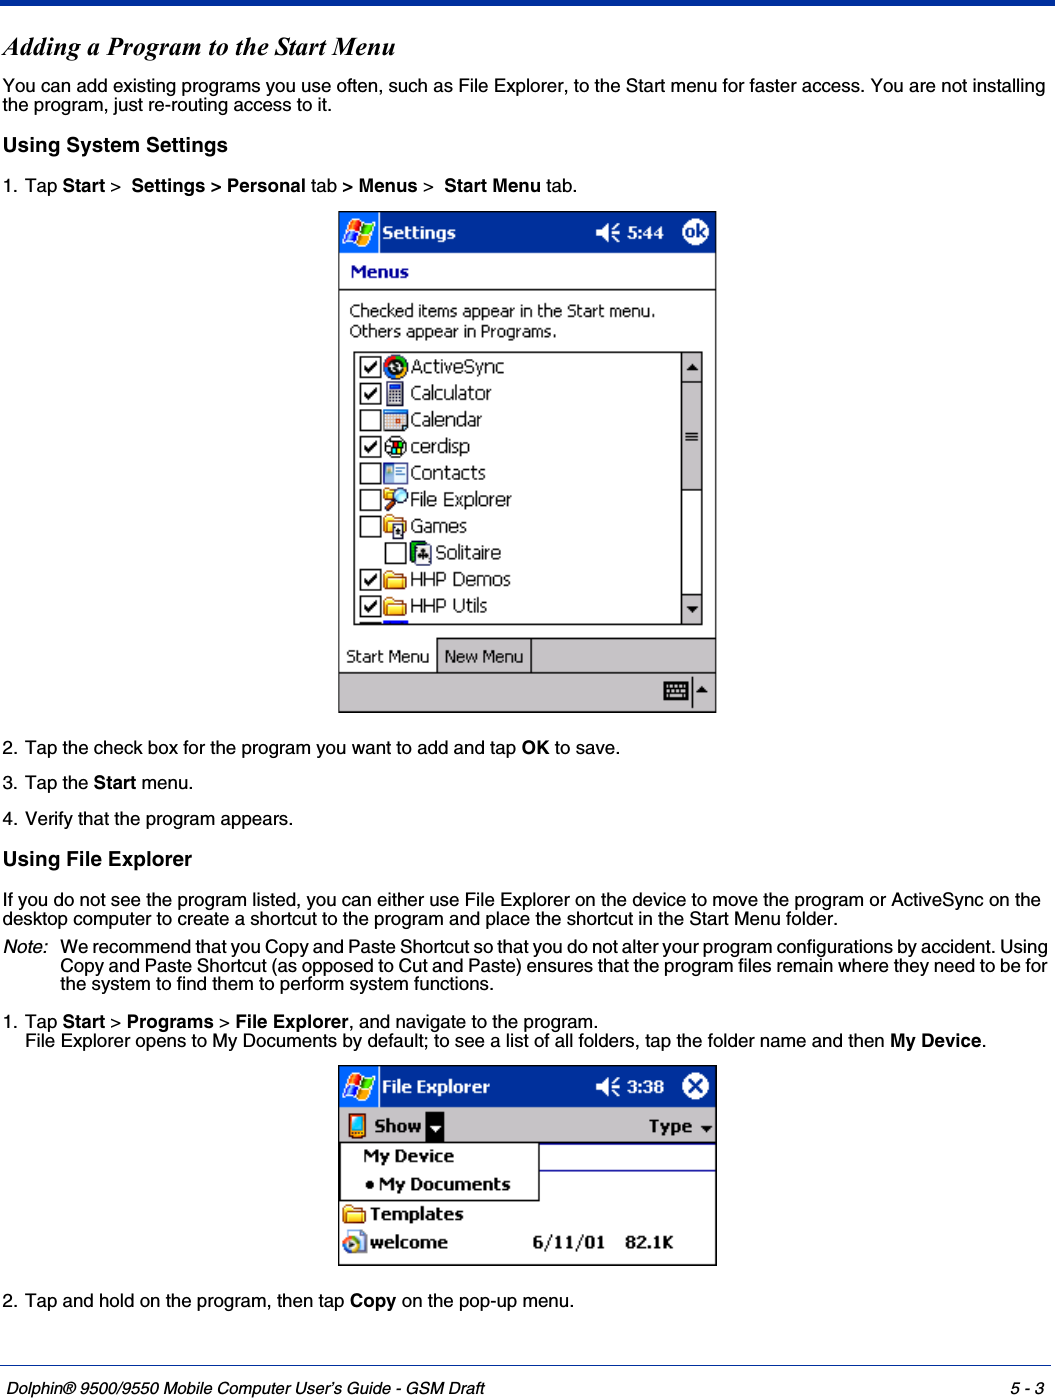 Dolphin® 9500/9550 Mobile Computer User’s Guide - GSM Draft 5 - 3Adding a Program to the Start MenuYou can add existing programs you use often, such as File Explorer, to the Start menu for faster access. You are not installing the program, just re-routing access to it.Using System Settings1. Tap Start &gt;  Settings &gt; Personal tab &gt; Menus &gt;  Start Menu tab.  2. Tap the check box for the program you want to add and tap OK to save.3. Tap the Start menu.4. Verify that the program appears.Using File ExplorerIf you do not see the program listed, you can either use File Explorer on the device to move the program or ActiveSync on the desktop computer to create a shortcut to the program and place the shortcut in the Start Menu folder.Note: We recommend that you Copy and Paste Shortcut so that you do not alter your program configurations by accident. Using Copy and Paste Shortcut (as opposed to Cut and Paste) ensures that the program files remain where they need to be for the system to find them to perform system functions.1. Tap Start &gt; Programs &gt; File Explorer, and navigate to the program.File Explorer opens to My Documents by default; to see a list of all folders, tap the folder name and then My Device. 2. Tap and hold on the program, then tap Copy on the pop-up menu. 